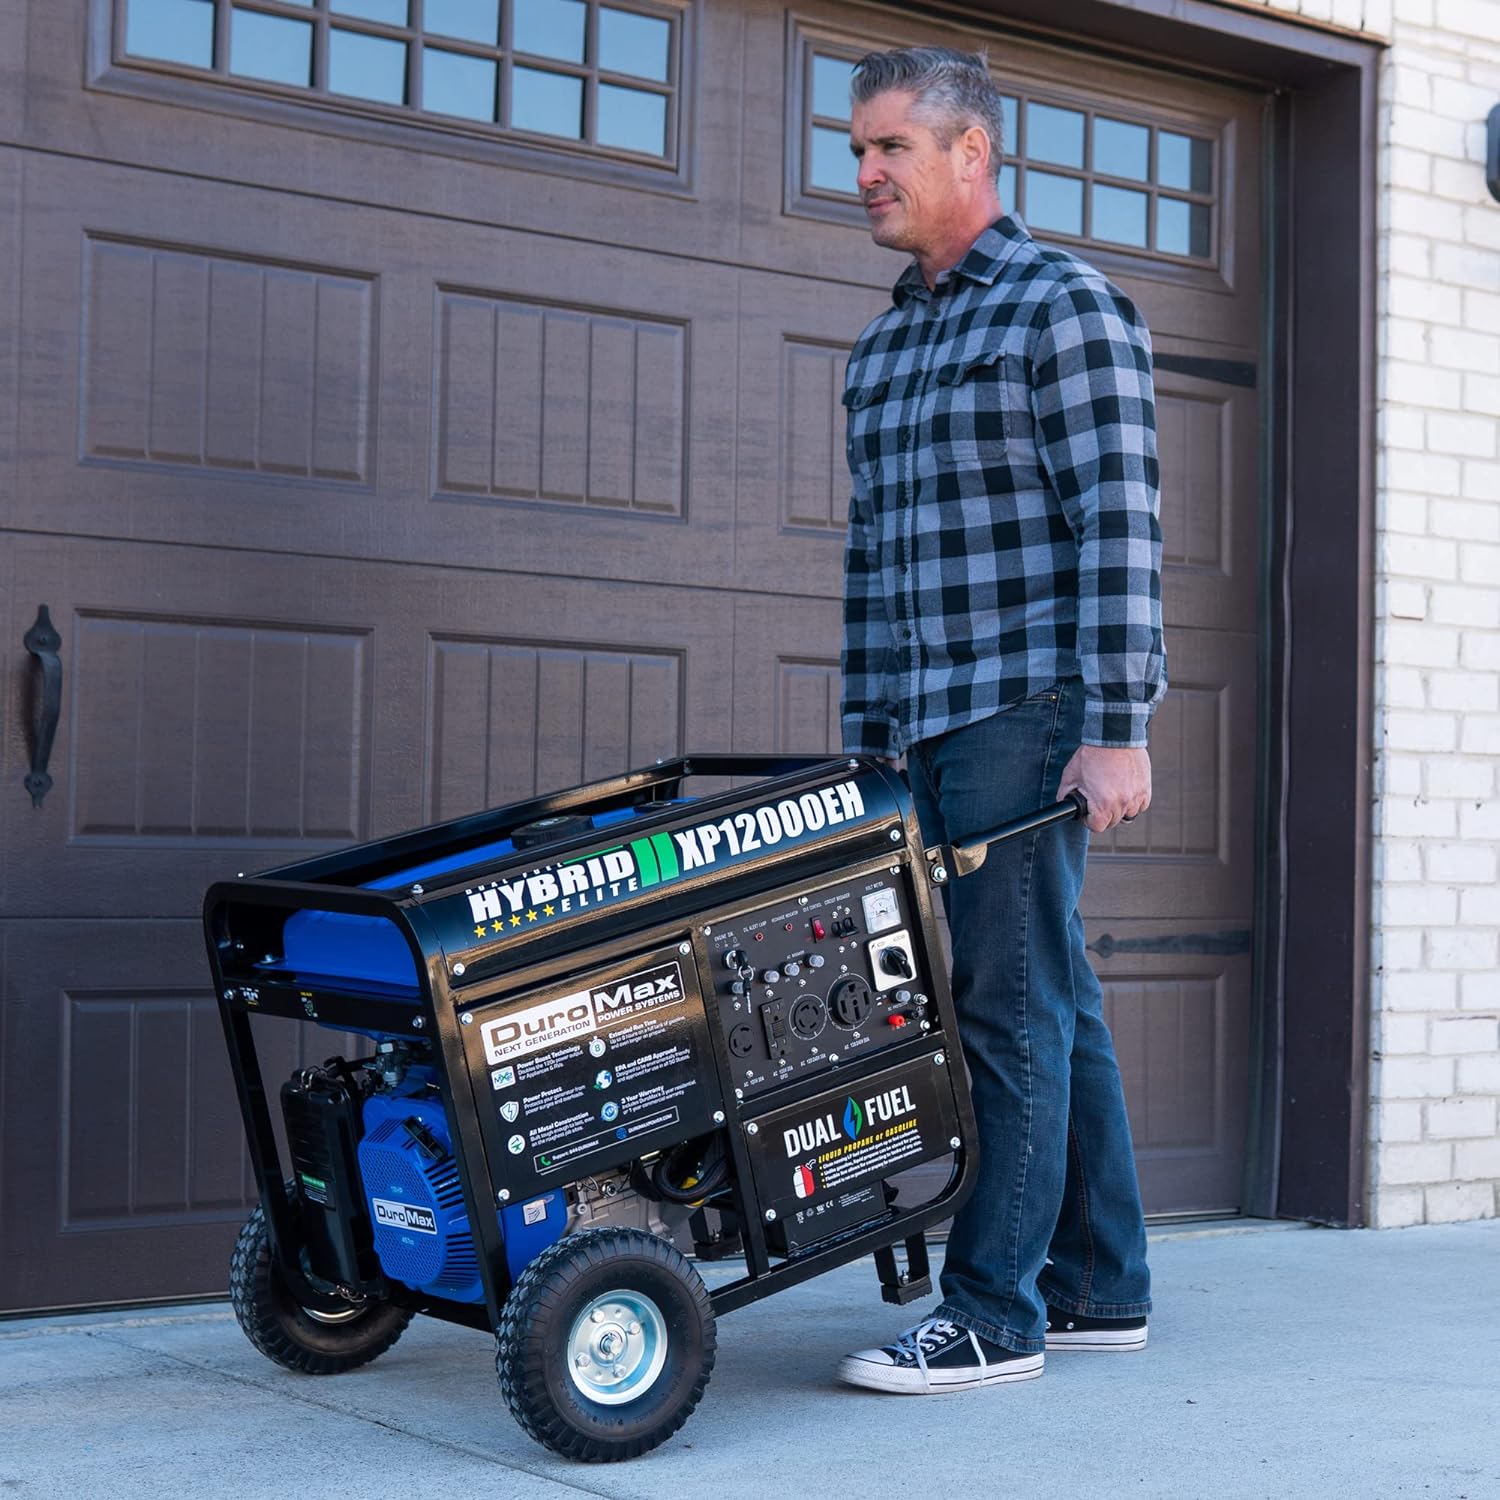 DuroMax XP13000EH Dual Fuel Portable Generator 13000 Watt Gas or Propane Powered Electric Start-Home Back Up, Blue/Gray - DuroMax XP13000EH Dual Fuel Portable Generator Review